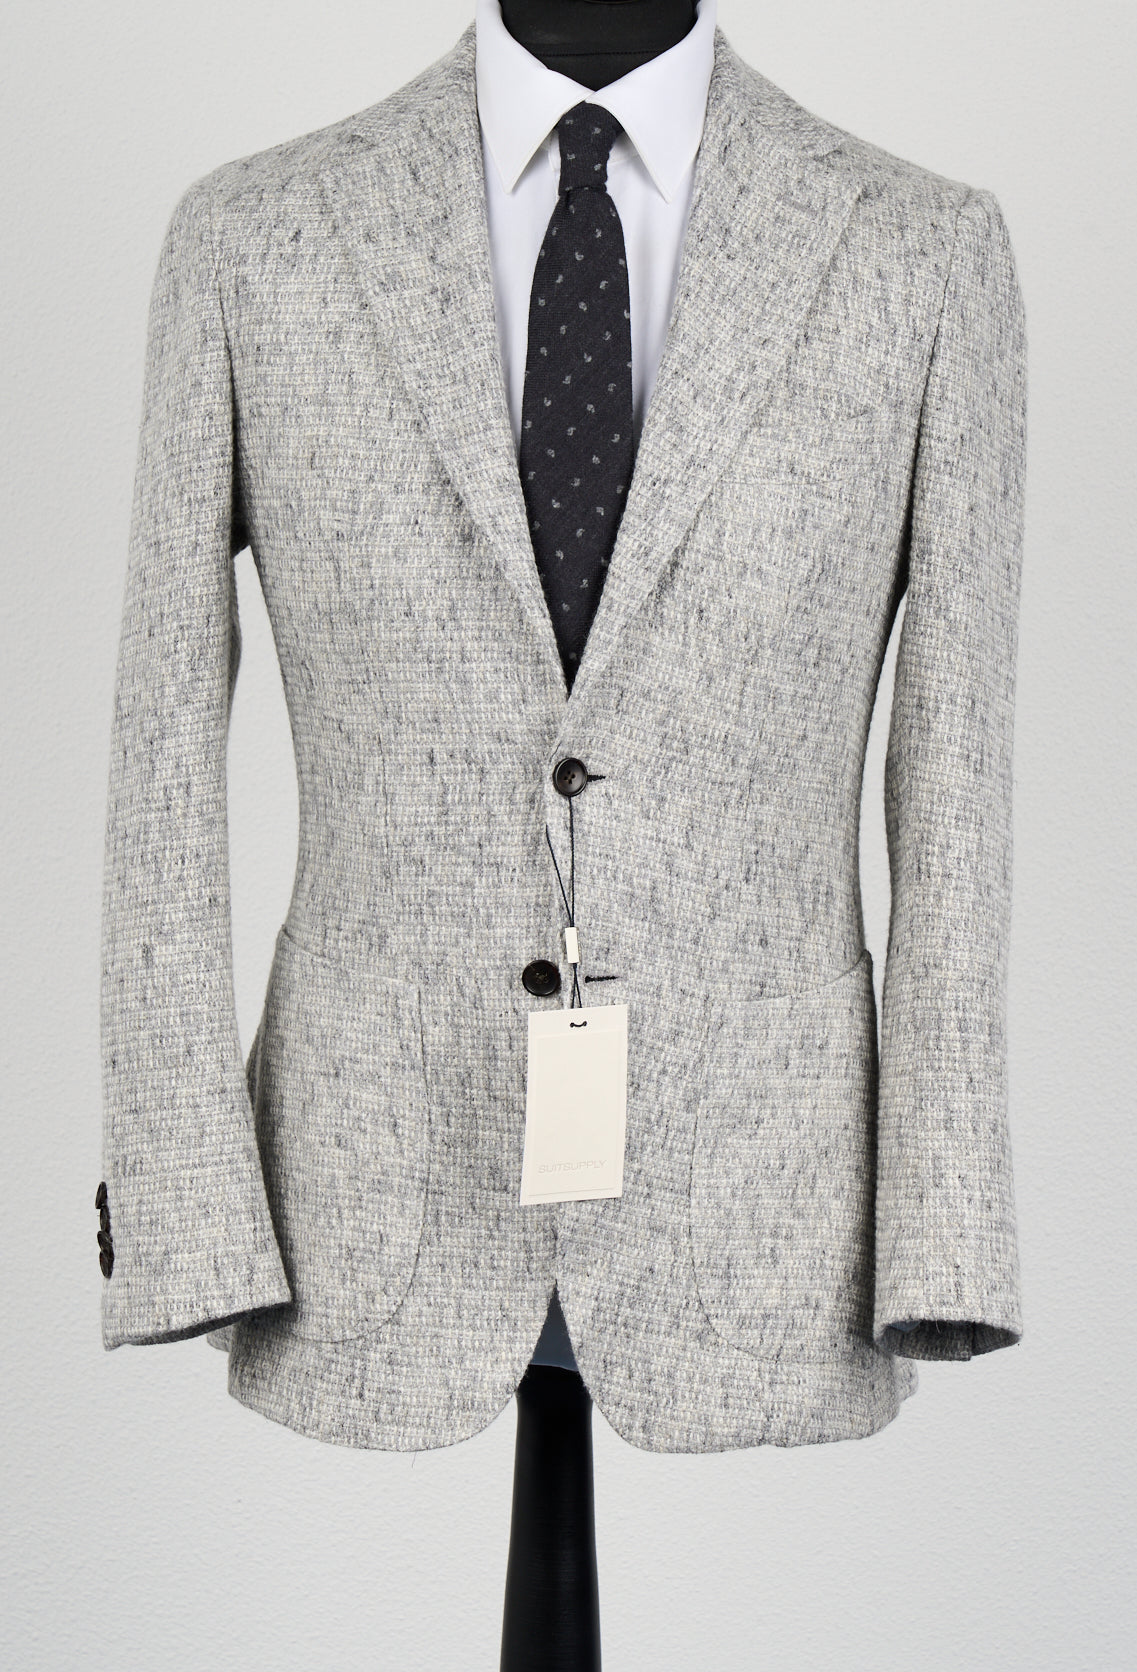 New Suitsupply Lazio Patch Light Gray Unconstructed Unlined Blazer -Size 34R, 36R, 38R, 38L, 40R (Super Light!)